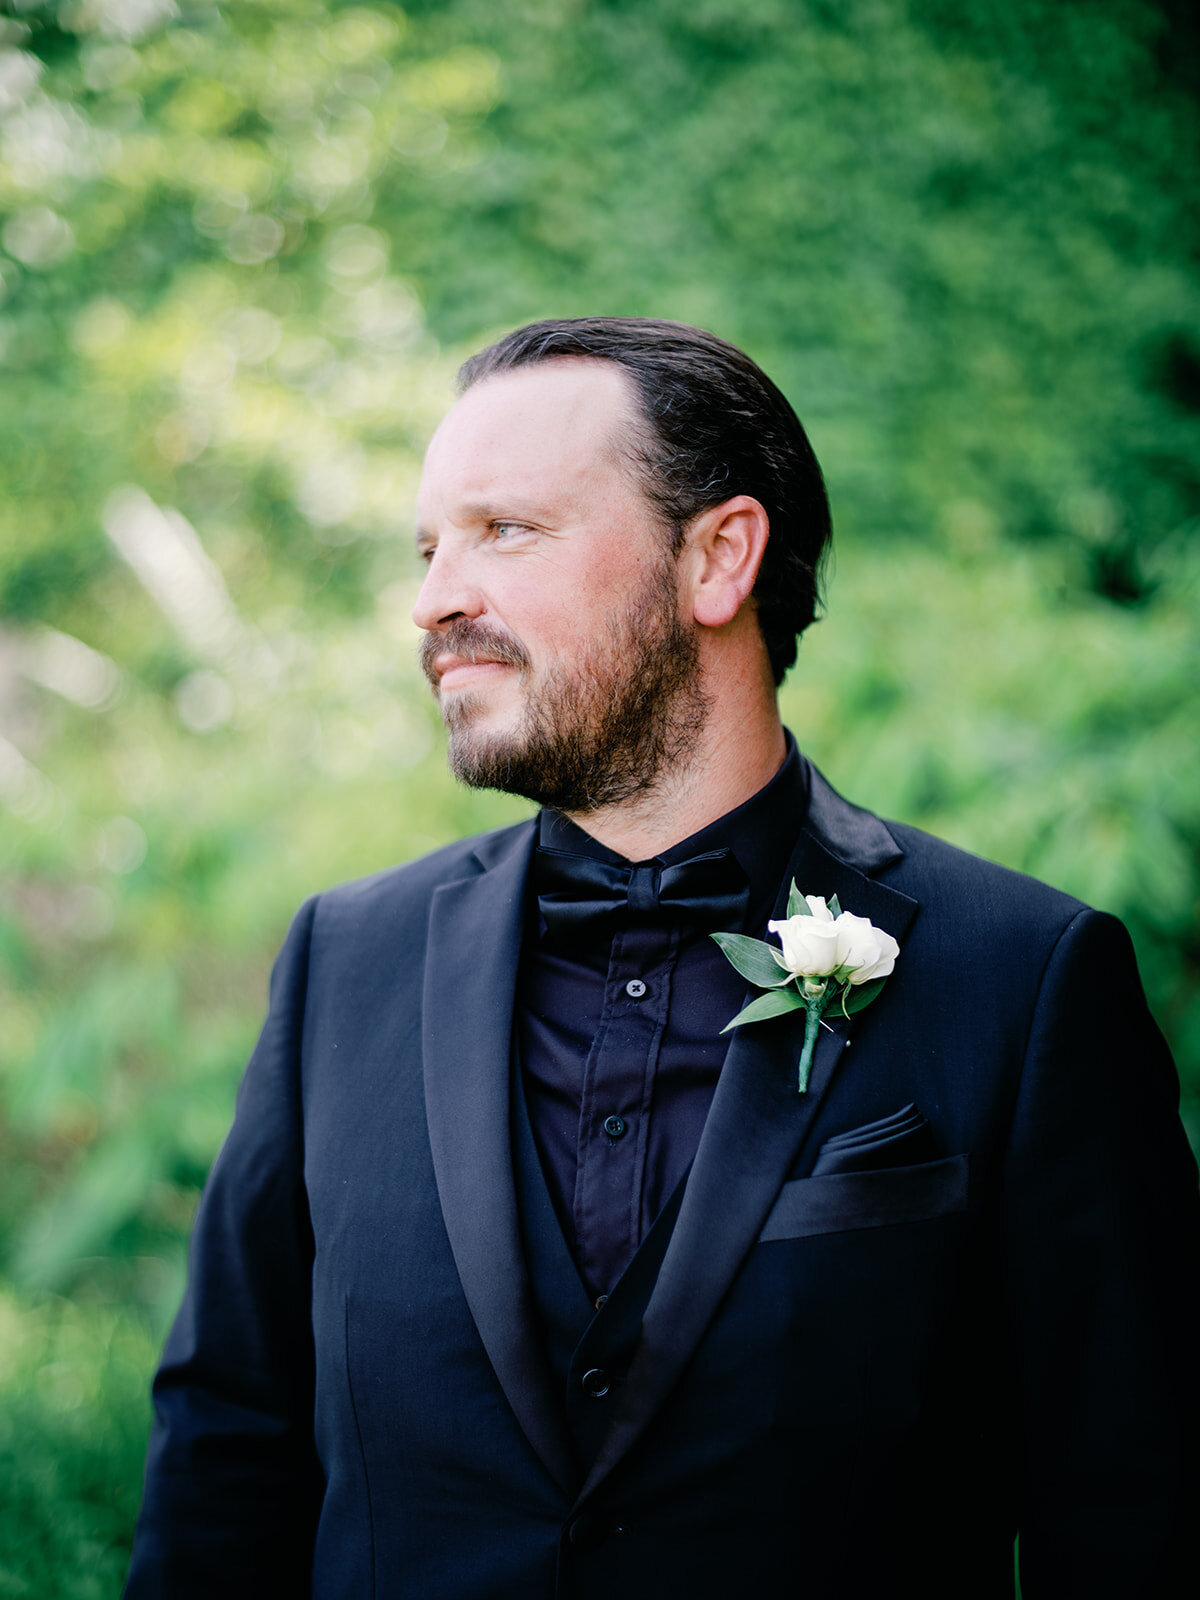 Portrait of groom wearing all black and one white flower on his jacket as he looks sideways with lush green in the background.